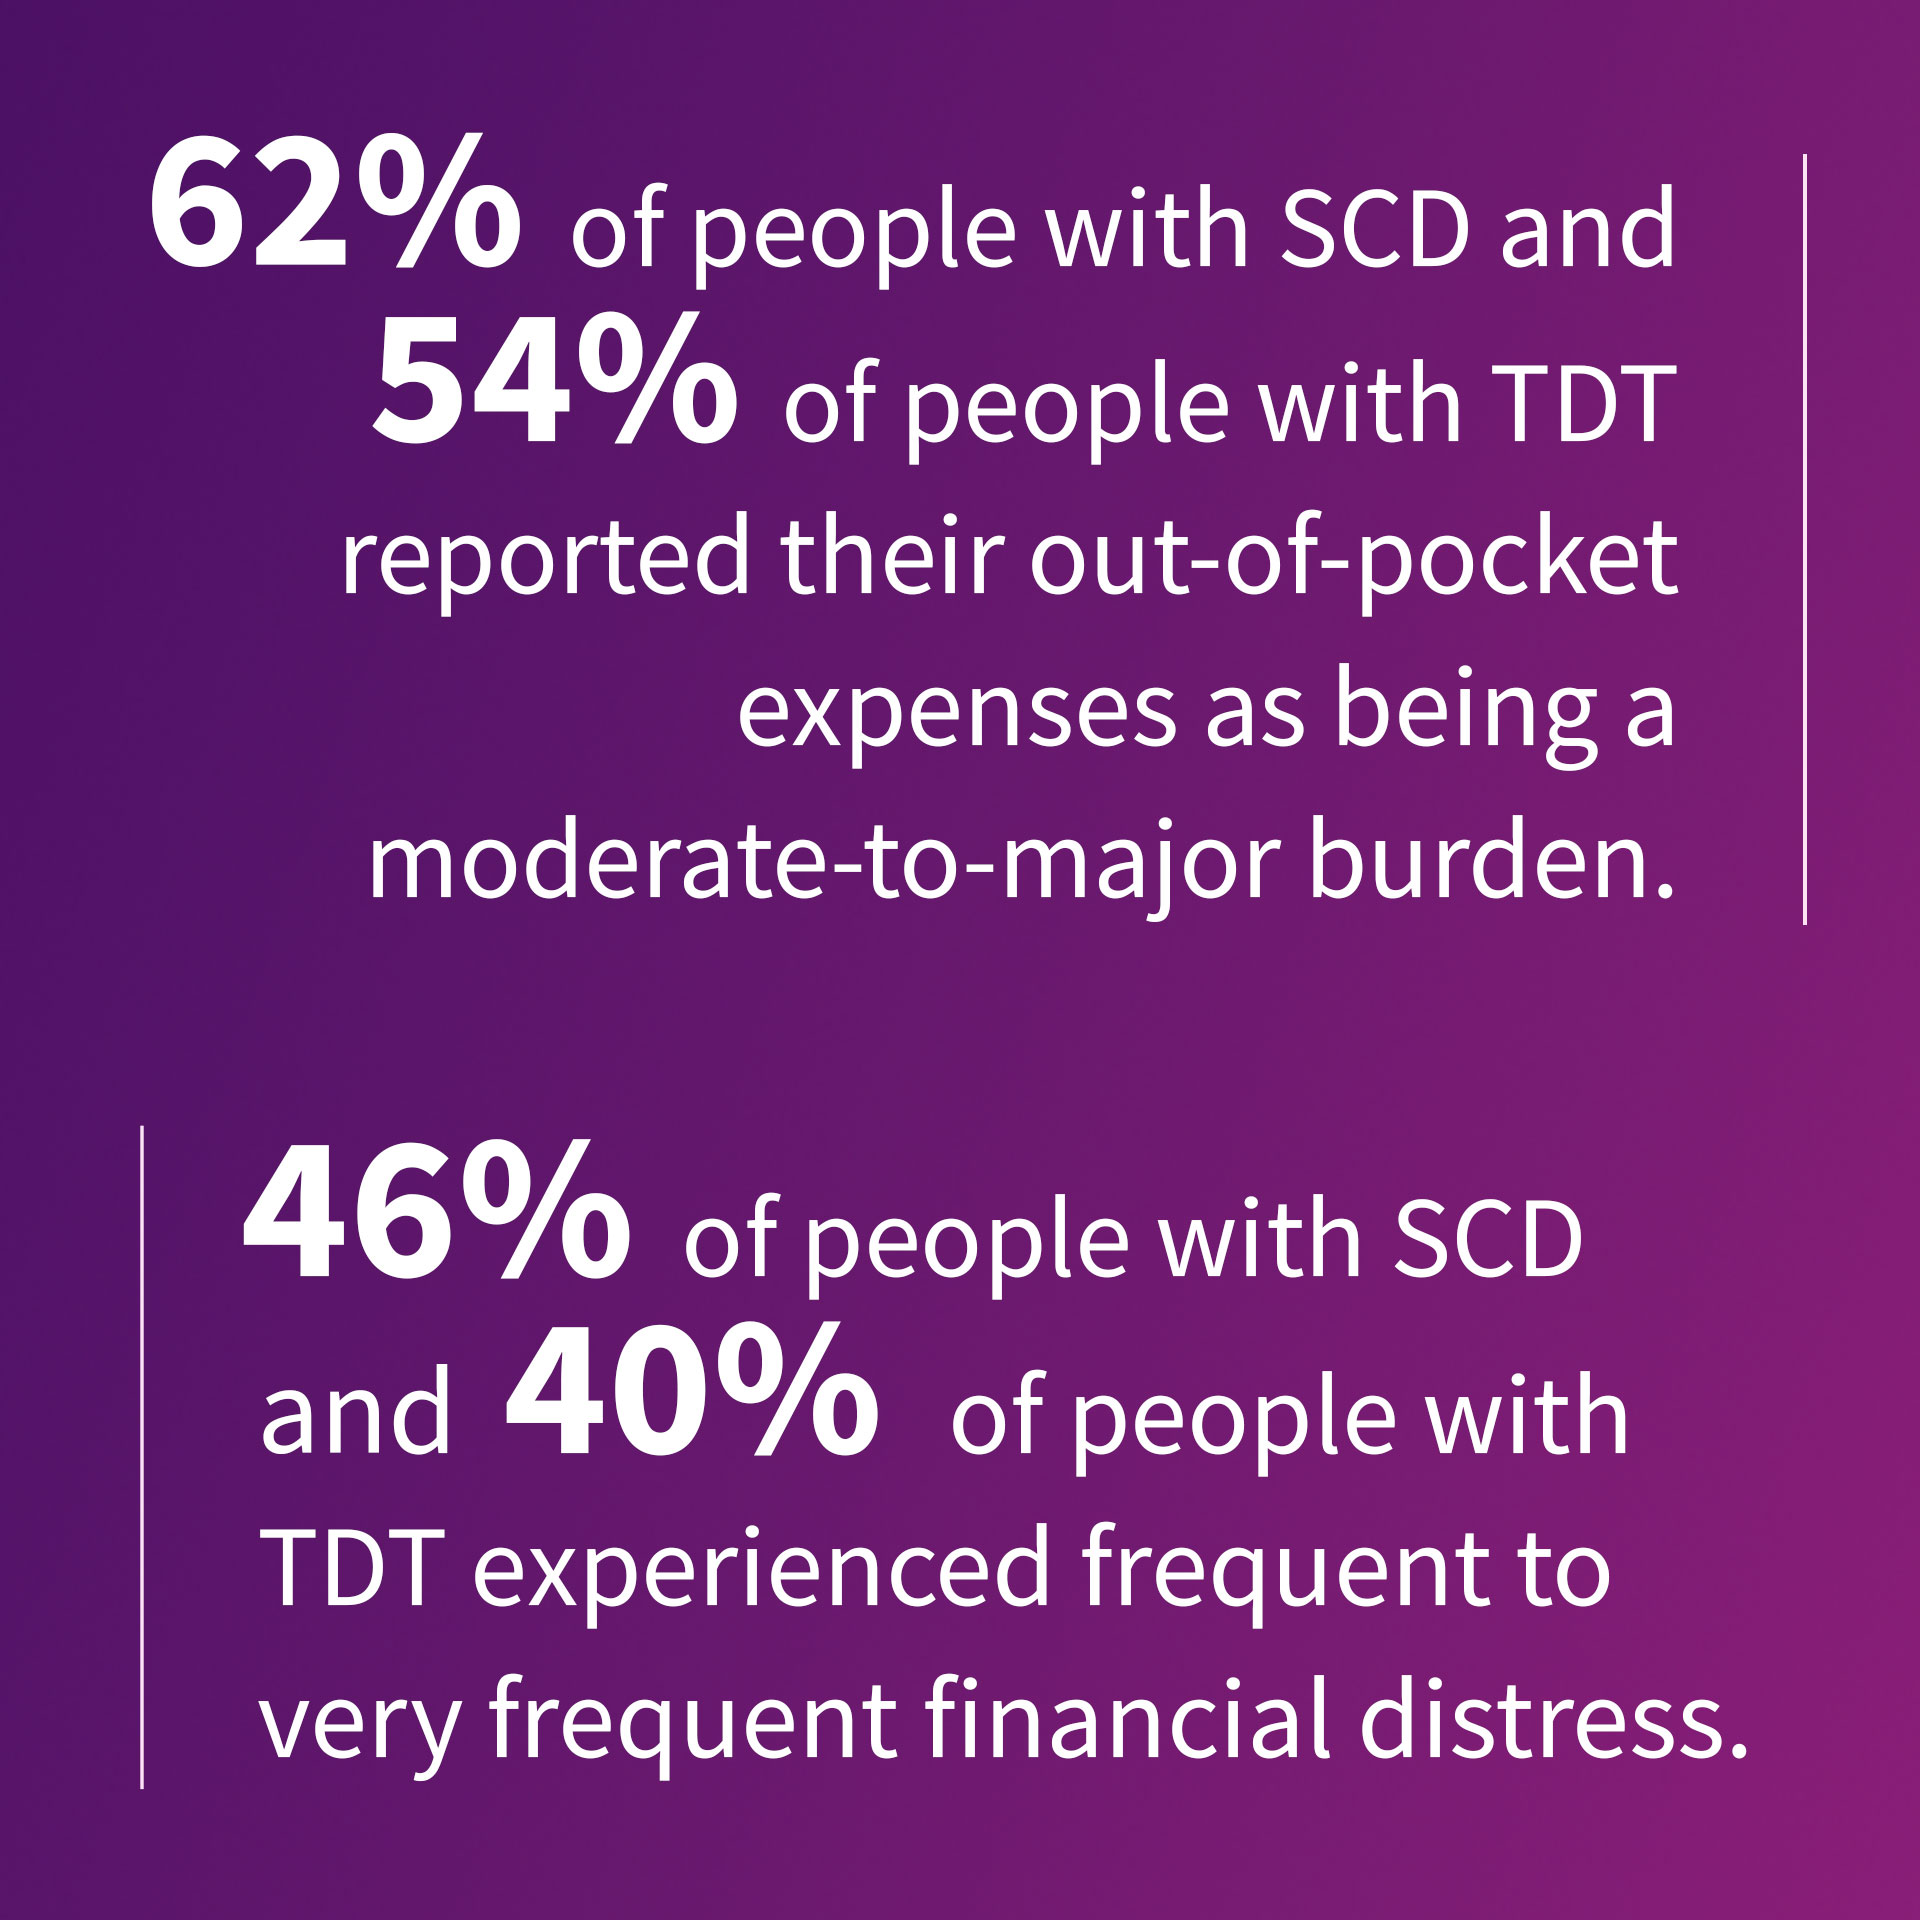 An infographic stating: 62% of people with SCD and 54% of people with TDT reported their out-of-pocket expenses as being a moderate-to-major burden   46% of people with SCD and 40% of people with TDT experienced frequent to very frequent financial distress. 